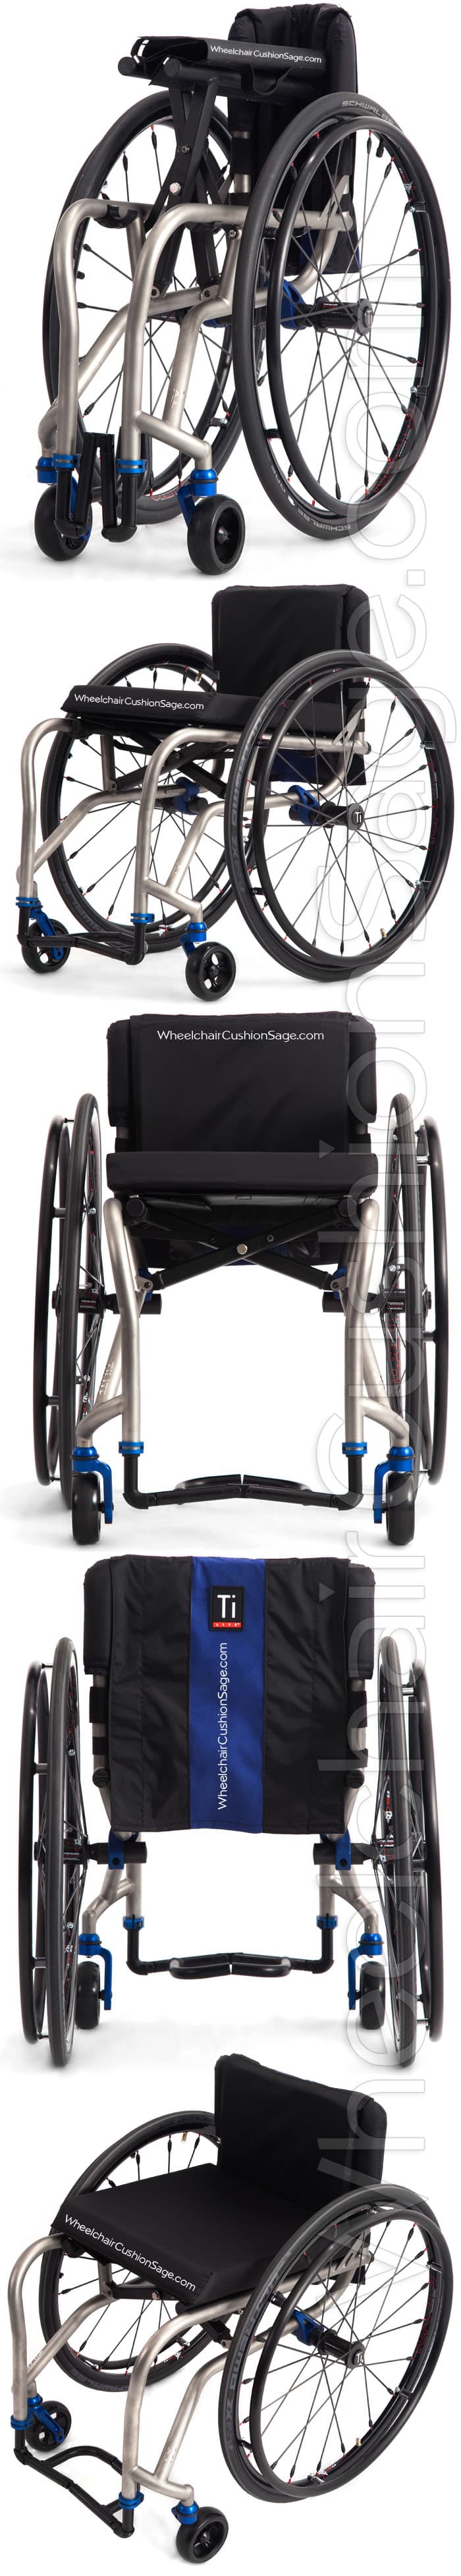  TiLite TX2 Wheelchair Views - Folded, Right, Front, Back, Top 